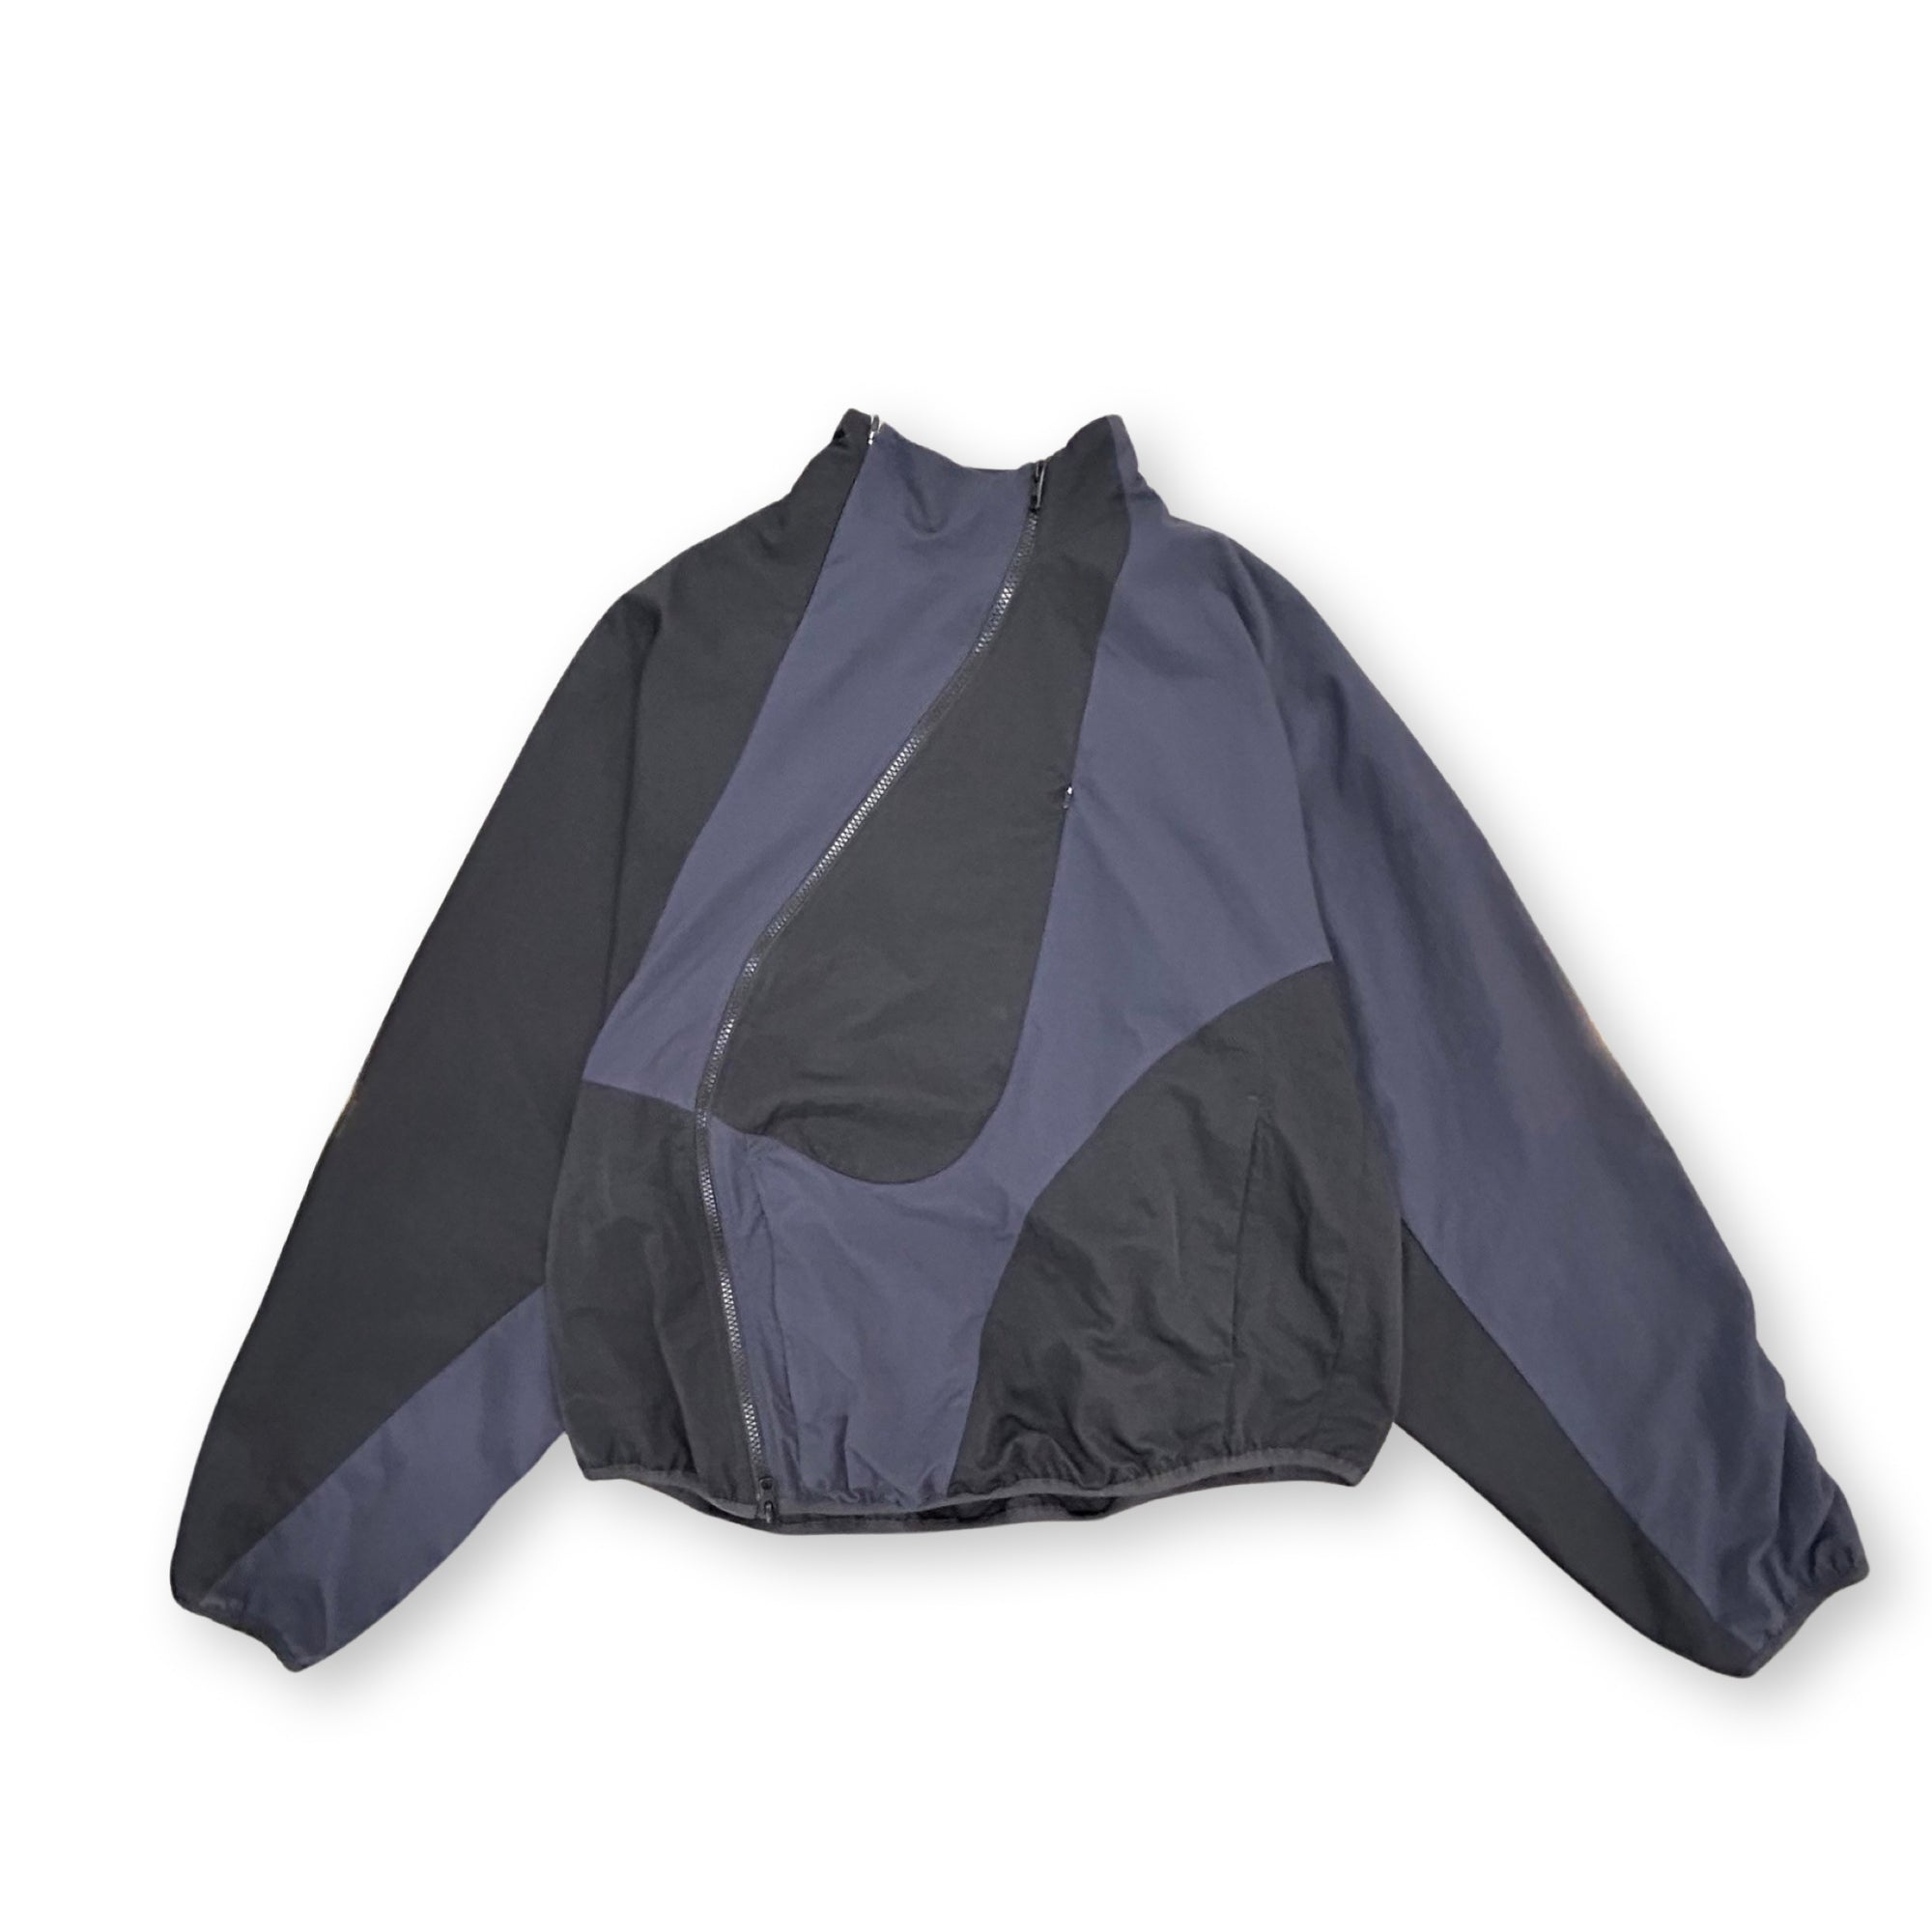 POST ARCHIVE FACTION 3.1 RIGHT JACKET ‘BLACK / NAVY’